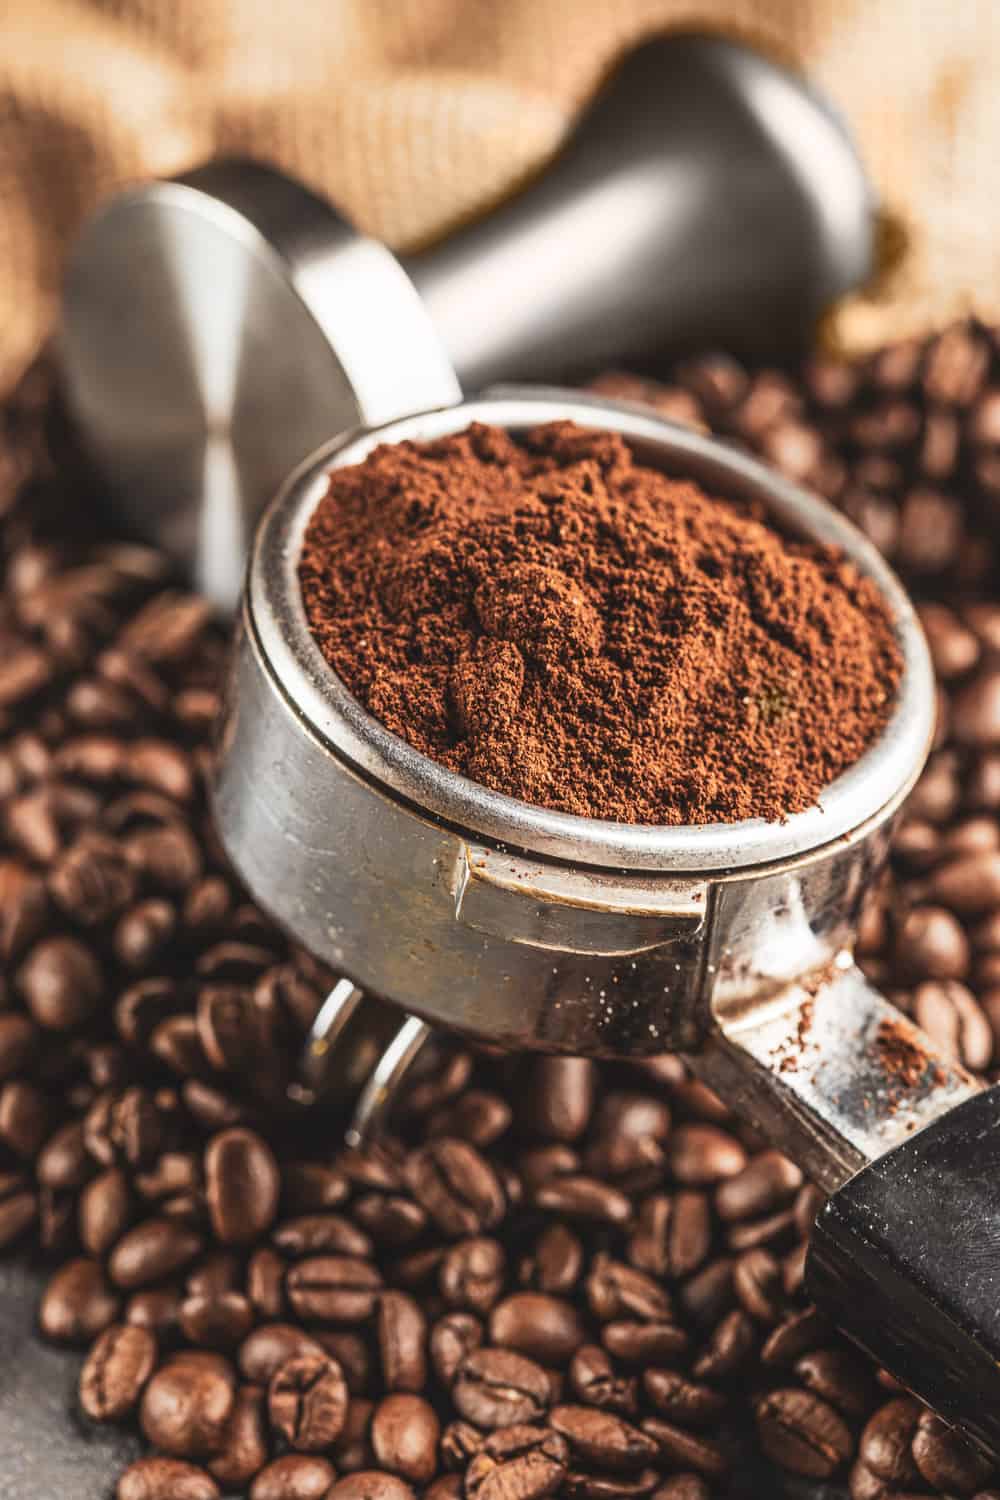 Is There More Caffeine in Espresso Than in Coffee? - Consumer Reports